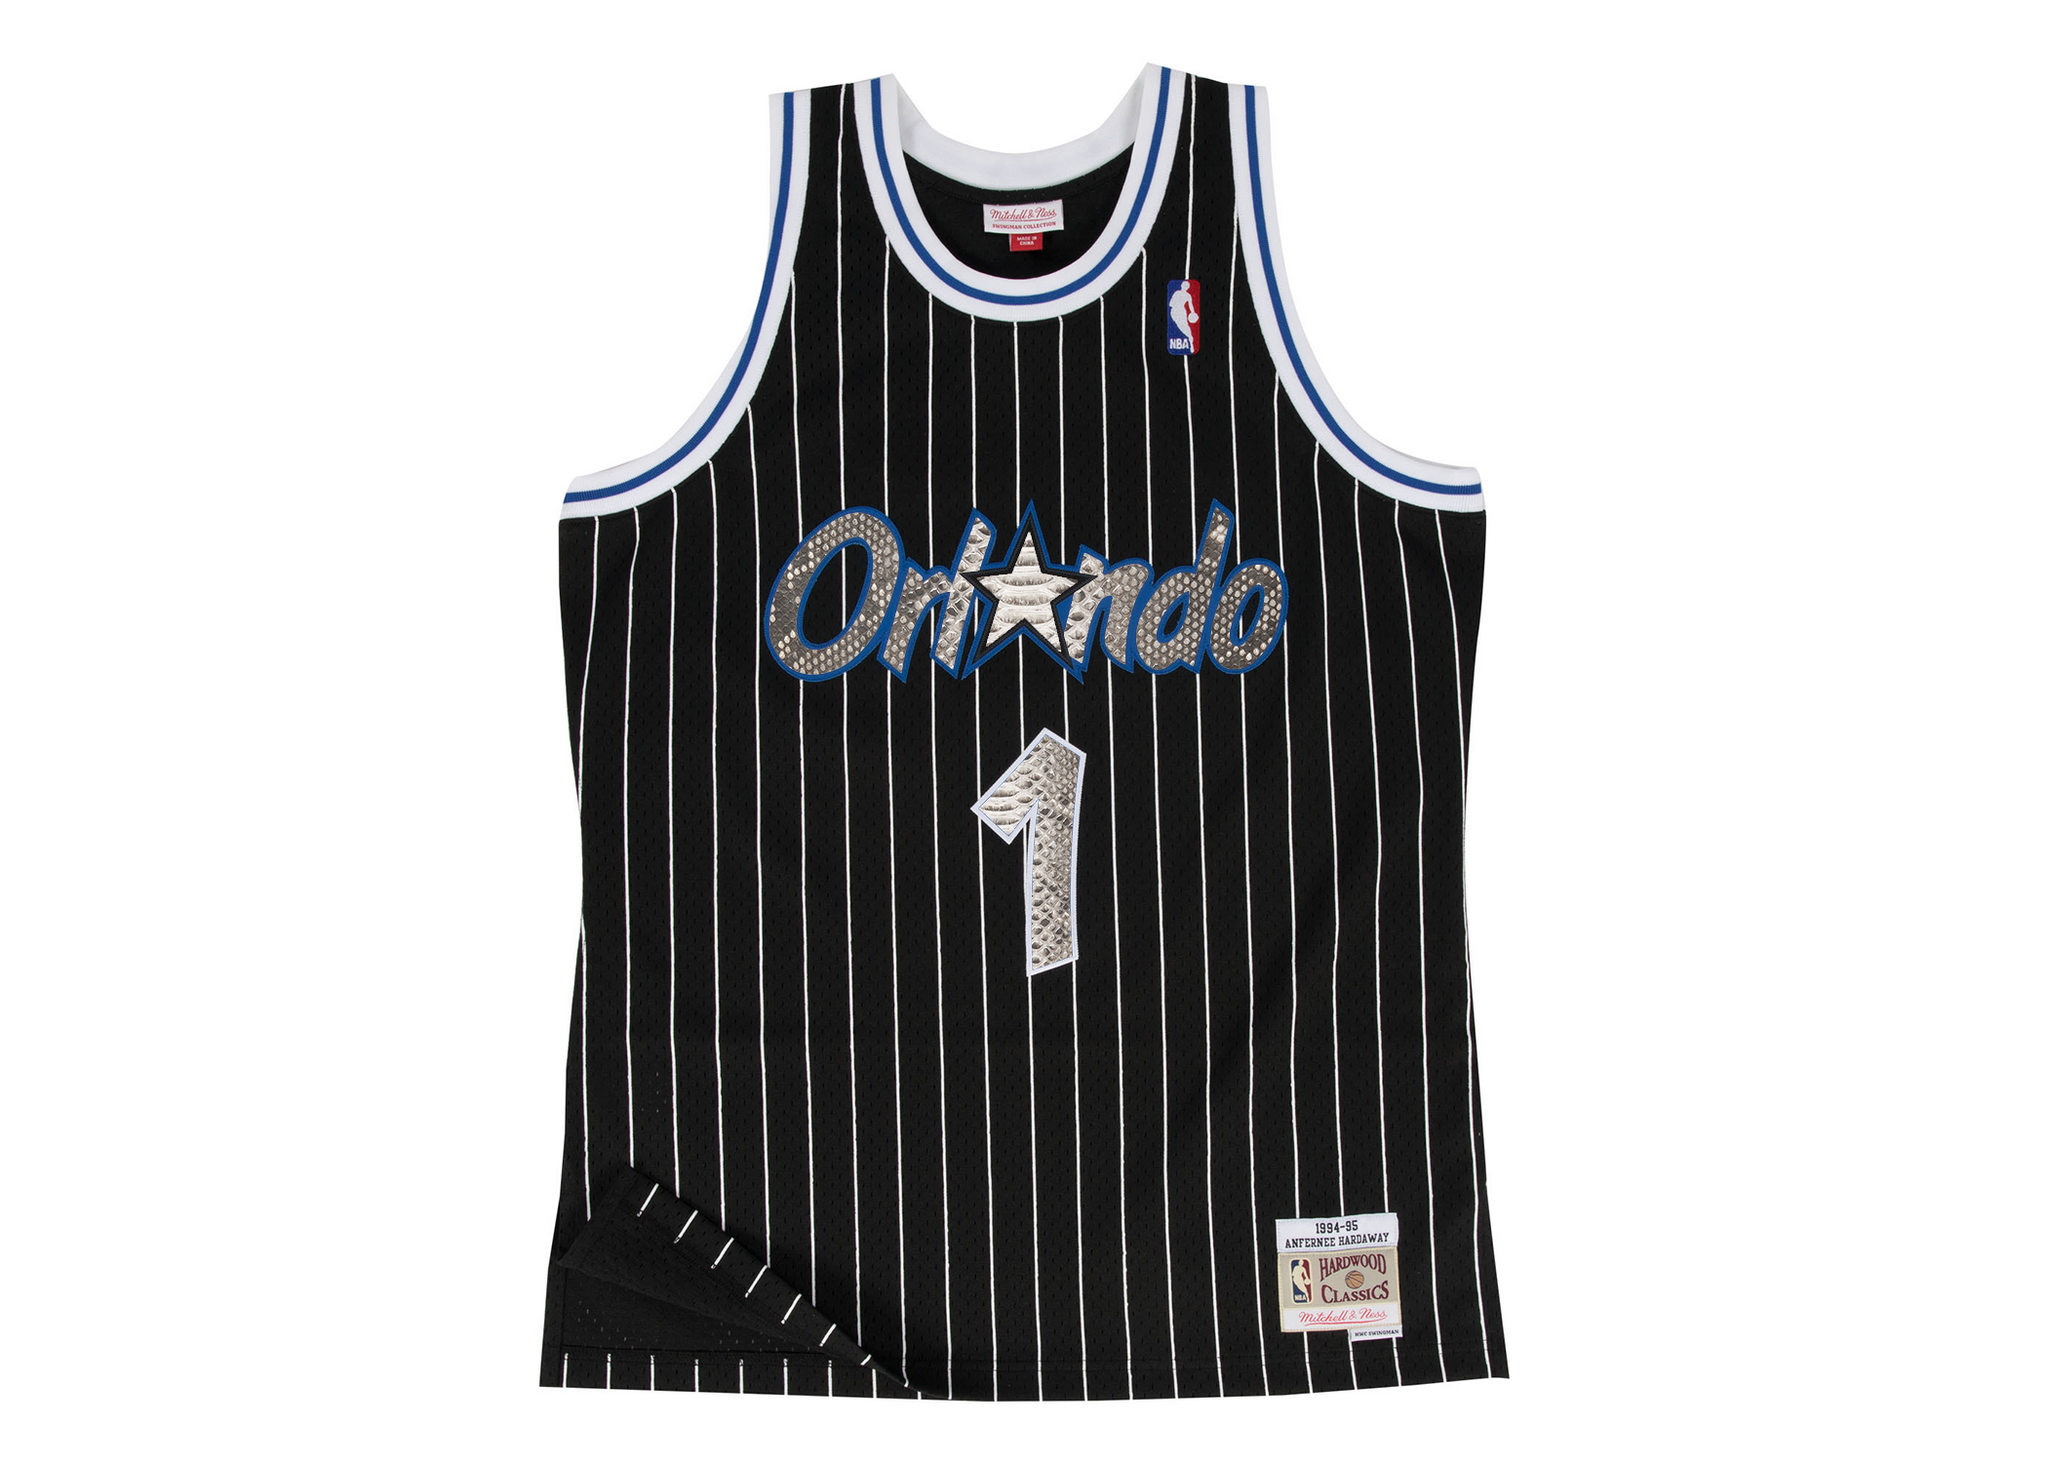 penny hardaway mitchell and ness jersey